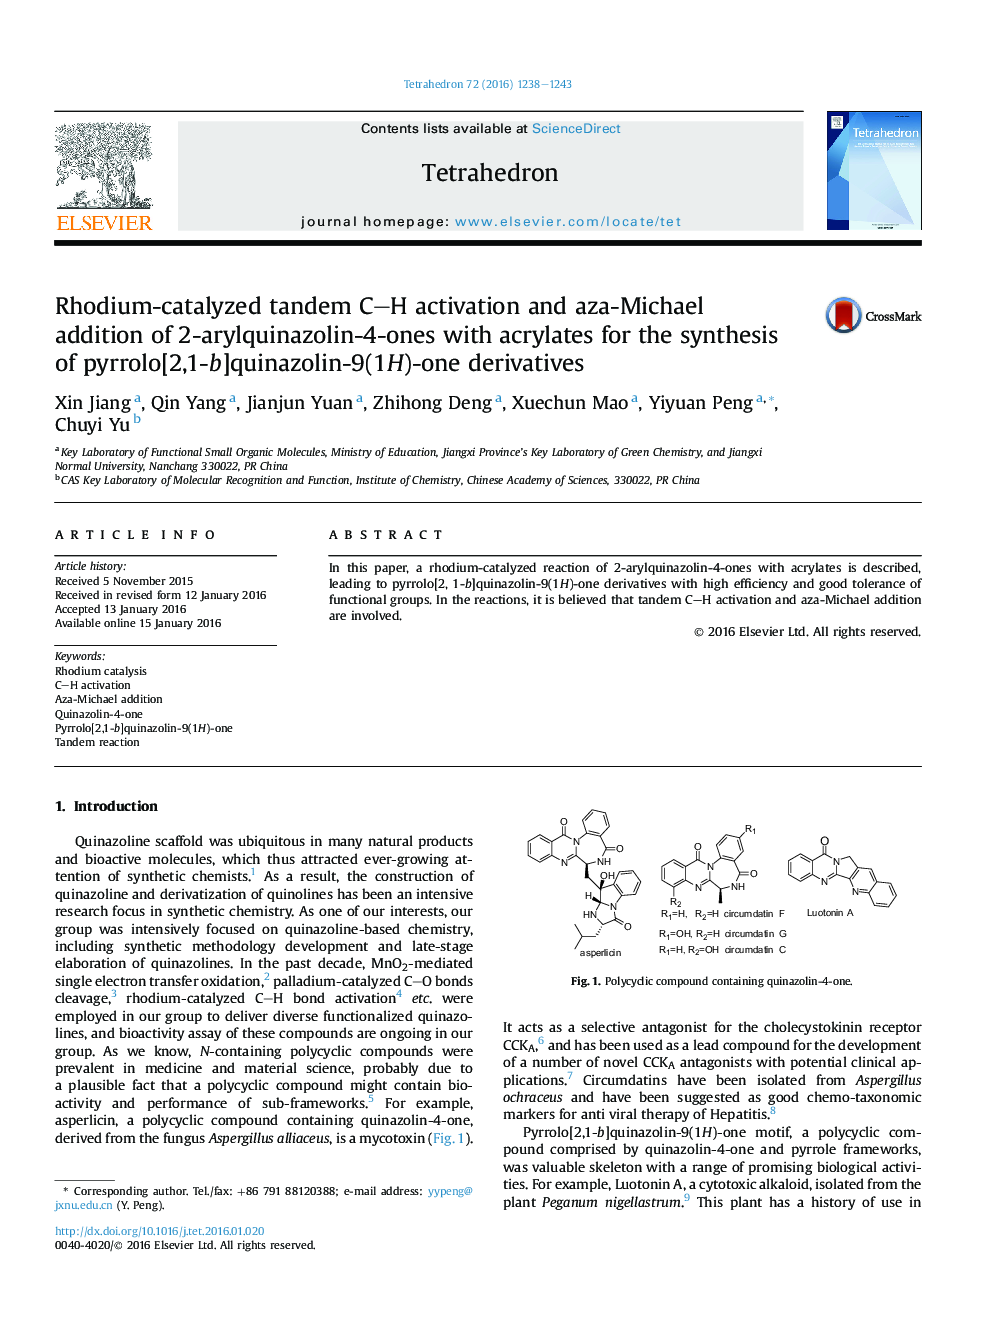 Rhodium-catalyzed tandem C-H activation and aza-Michael addition of 2-arylquinazolin-4-ones with acrylates for the synthesis of pyrrolo[2,1-b]quinazolin-9(1H)-one derivatives